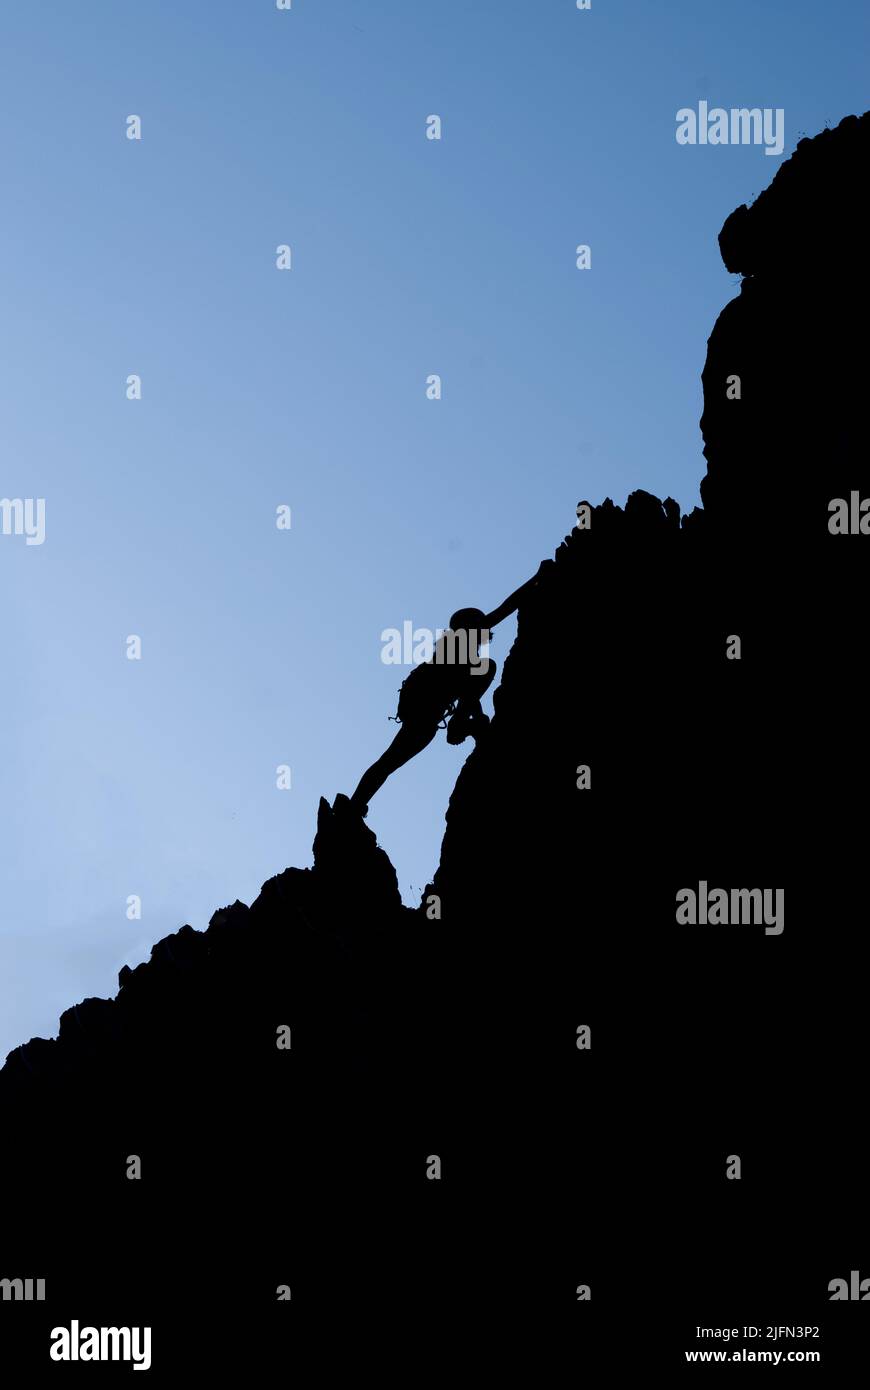 Silhouette of successful young female climber in the mountains Concept of self-improvement, motivation, movement inspiration, motivational goals. Adve Stock Photo